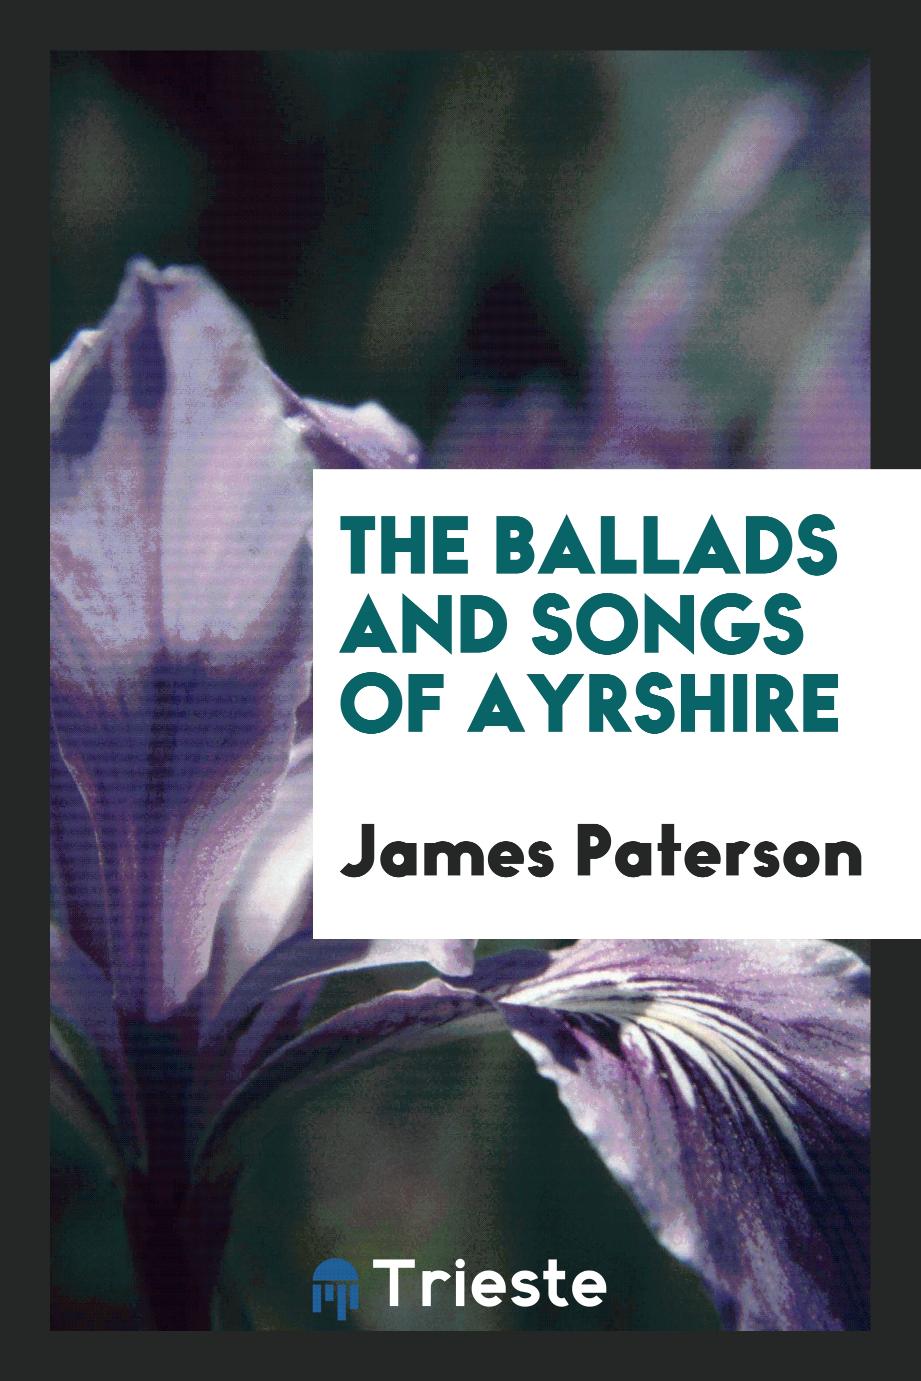 The ballads and songs of Ayrshire